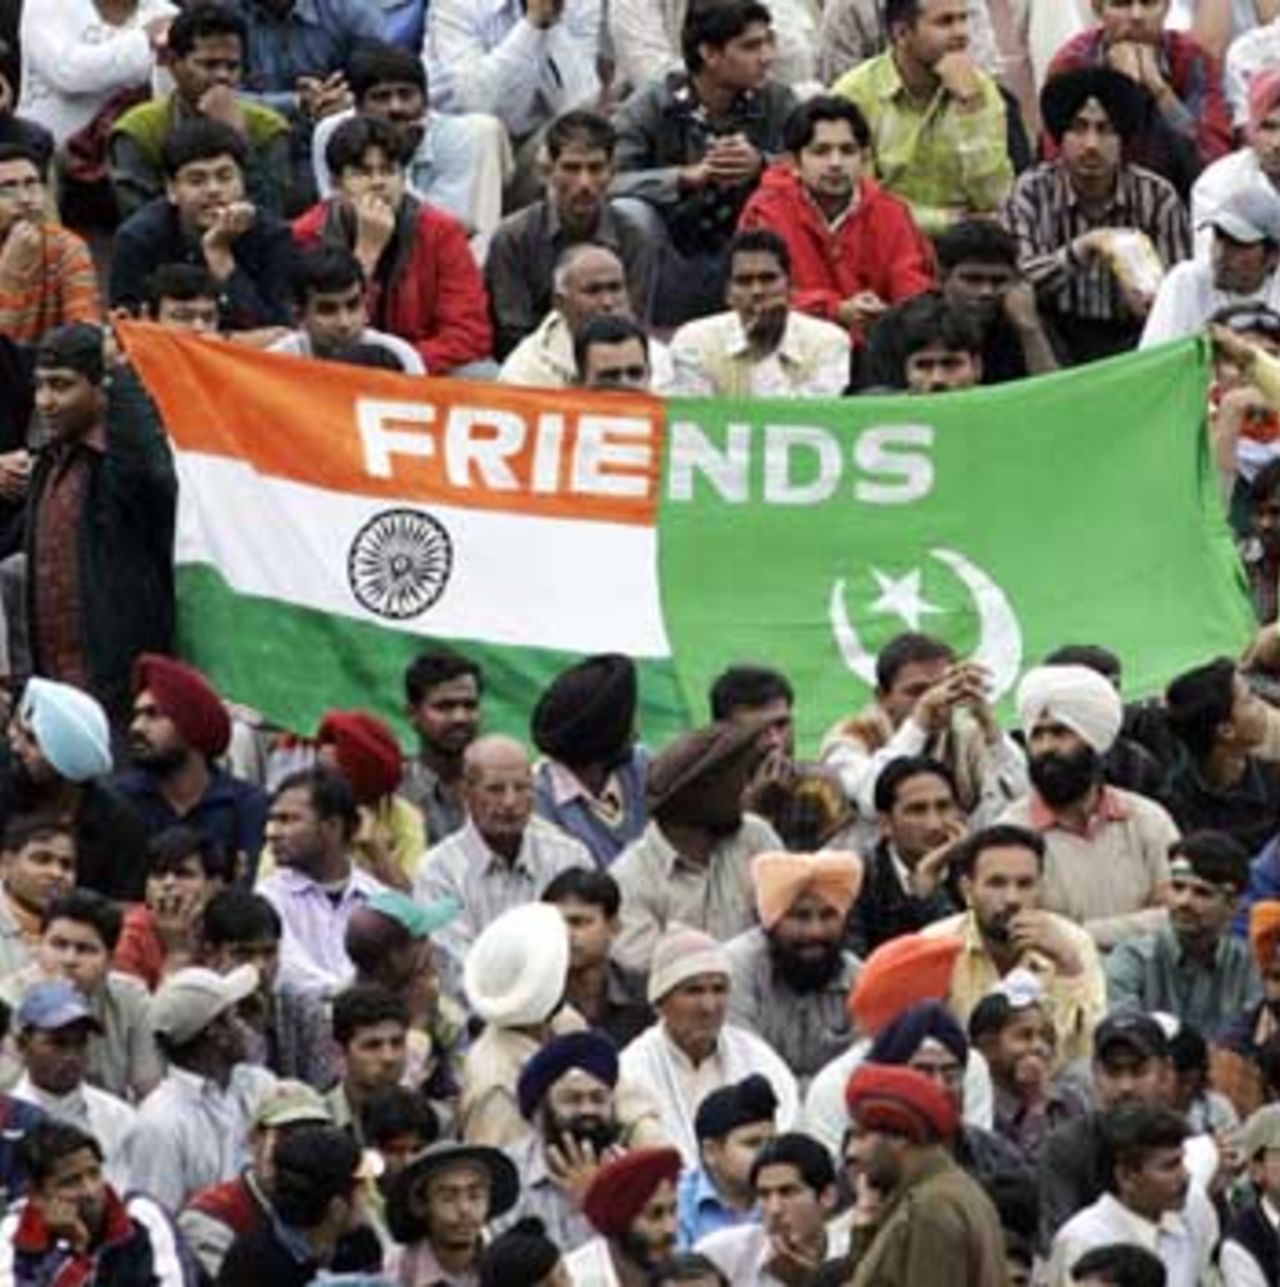 Once again the fans of the two countries showed excellent spirit, getting together in the stands, India v Pakistan, 1st Test, Mohali, March 9, 2005